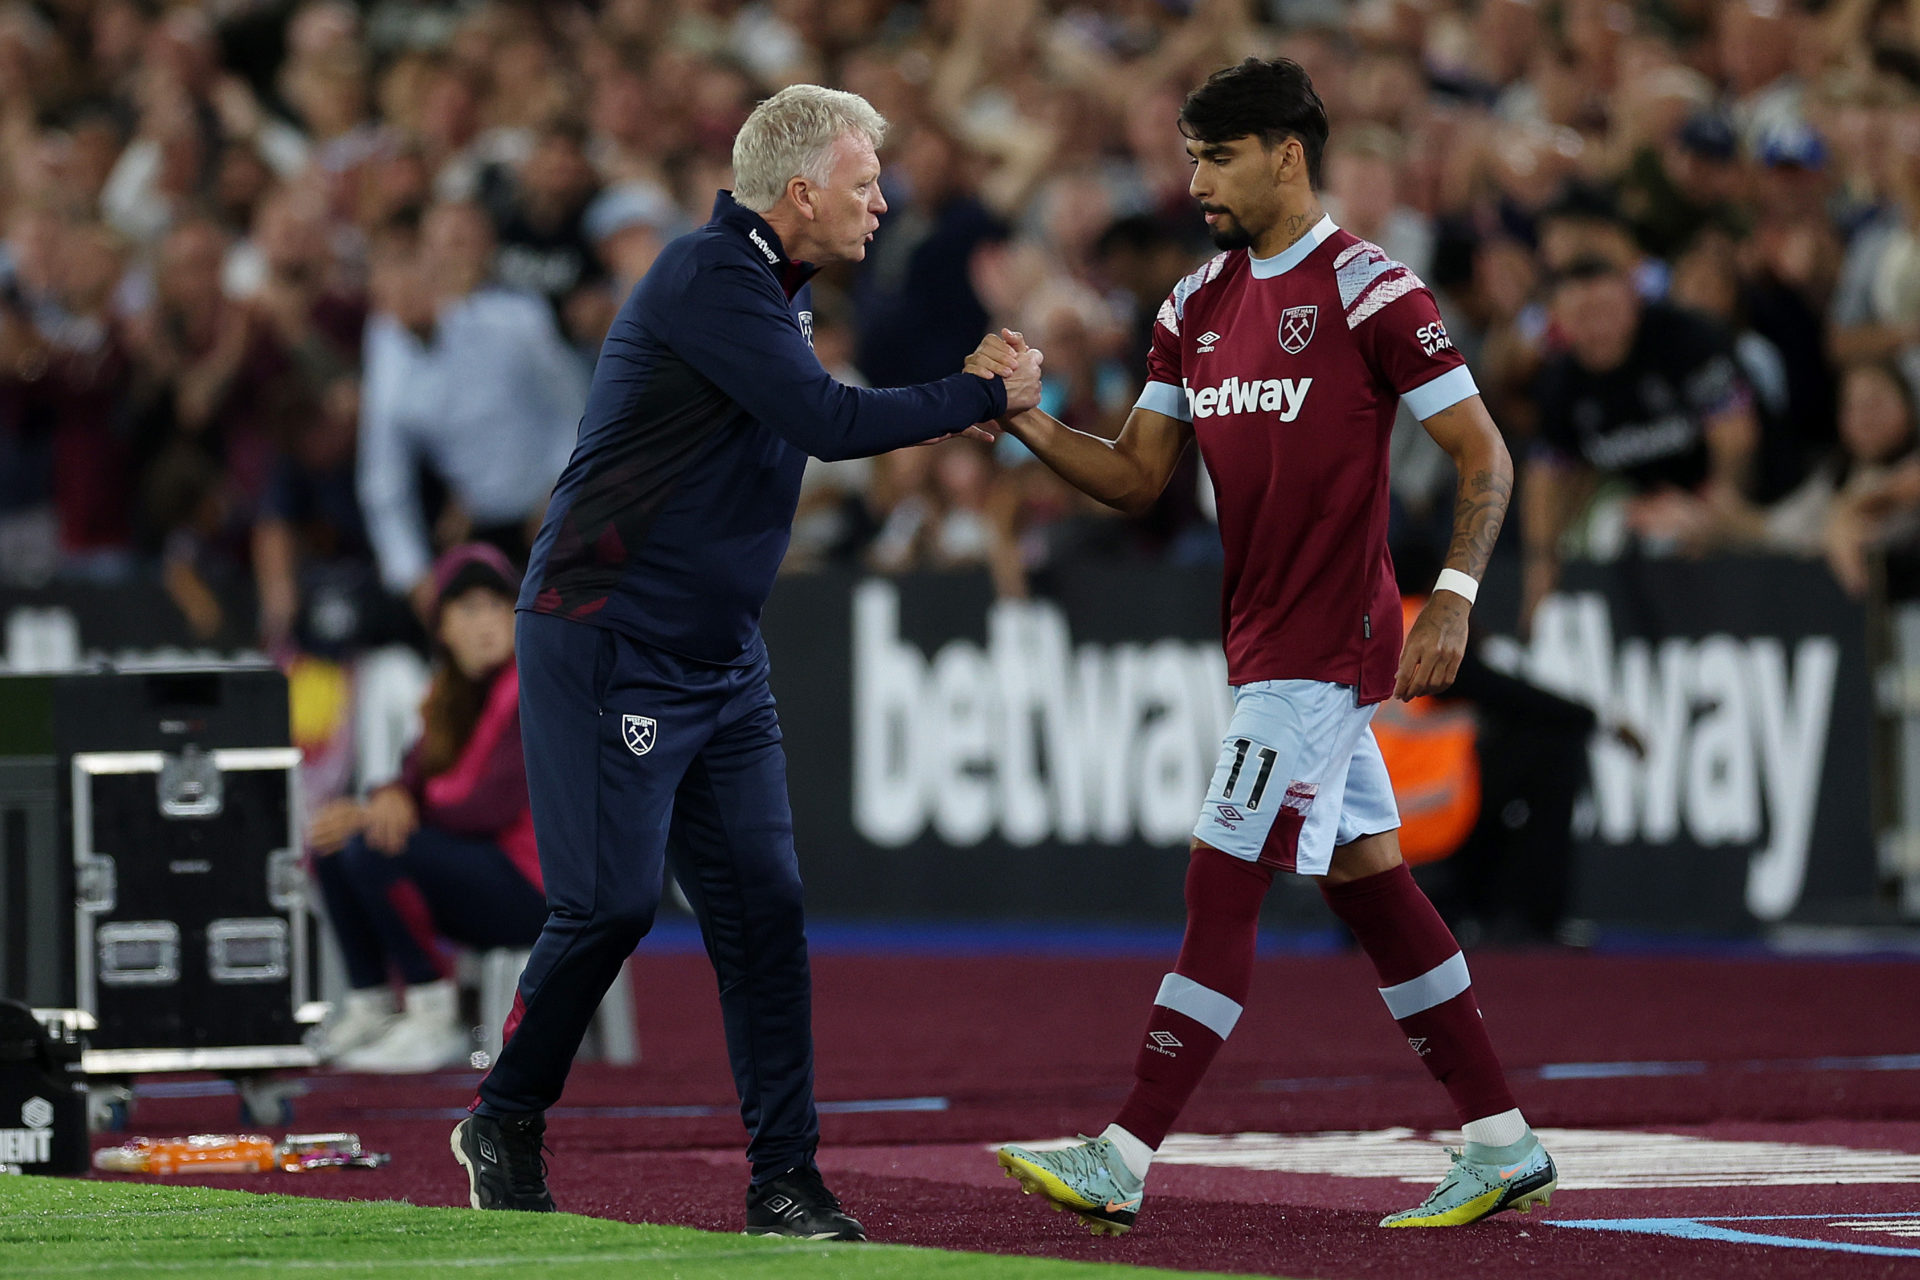 If Moyes jeopardises national places of duo West Ham will pay heavy price